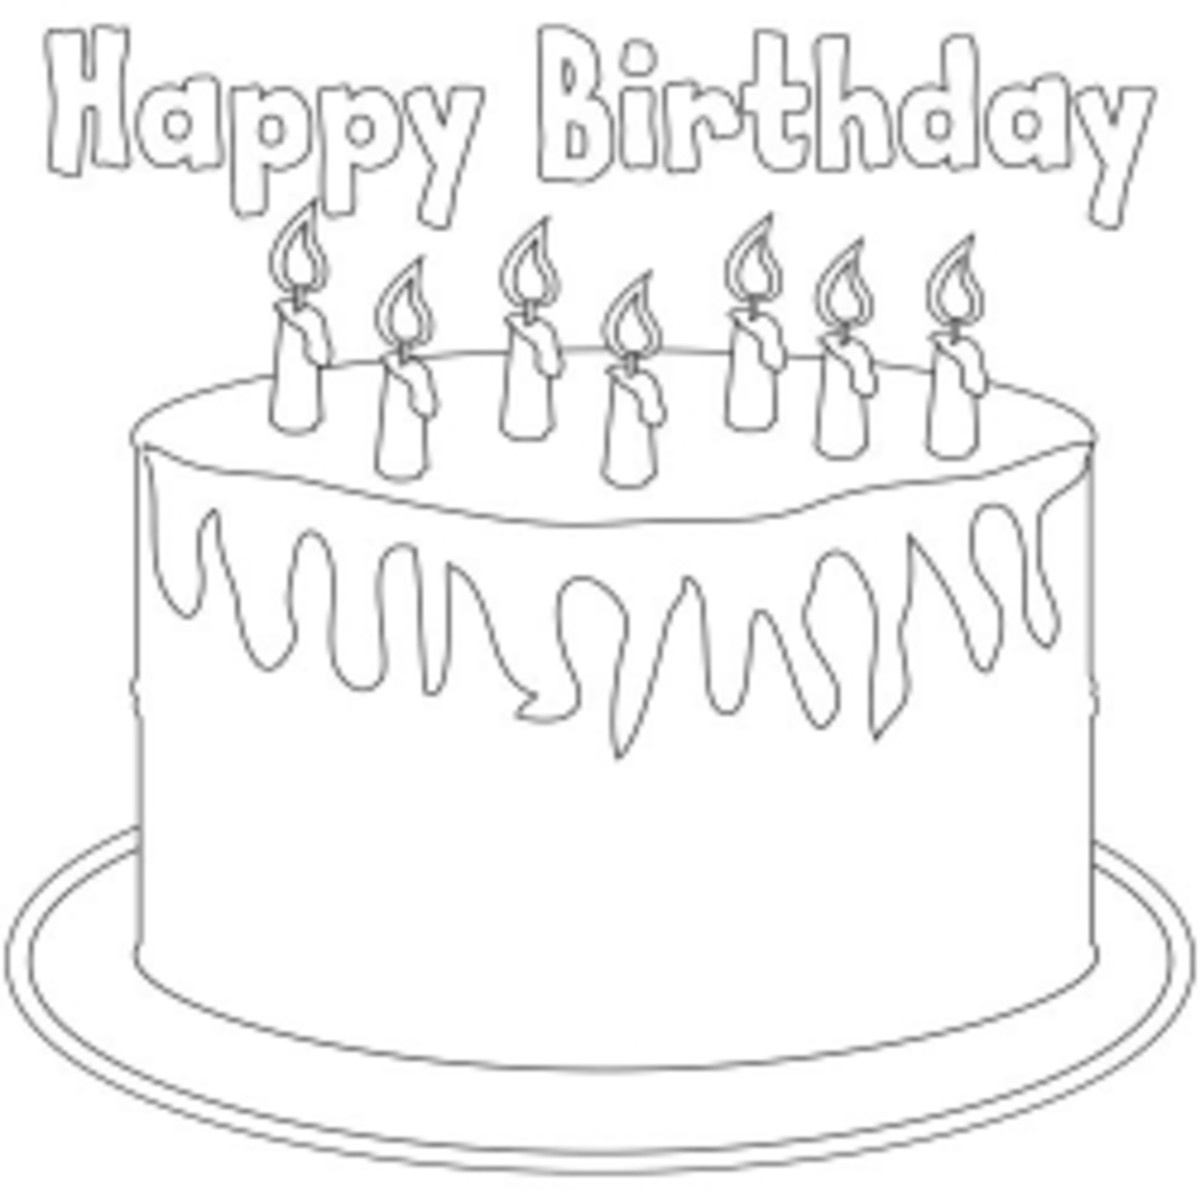 Birthday Coloring Pages hubpages